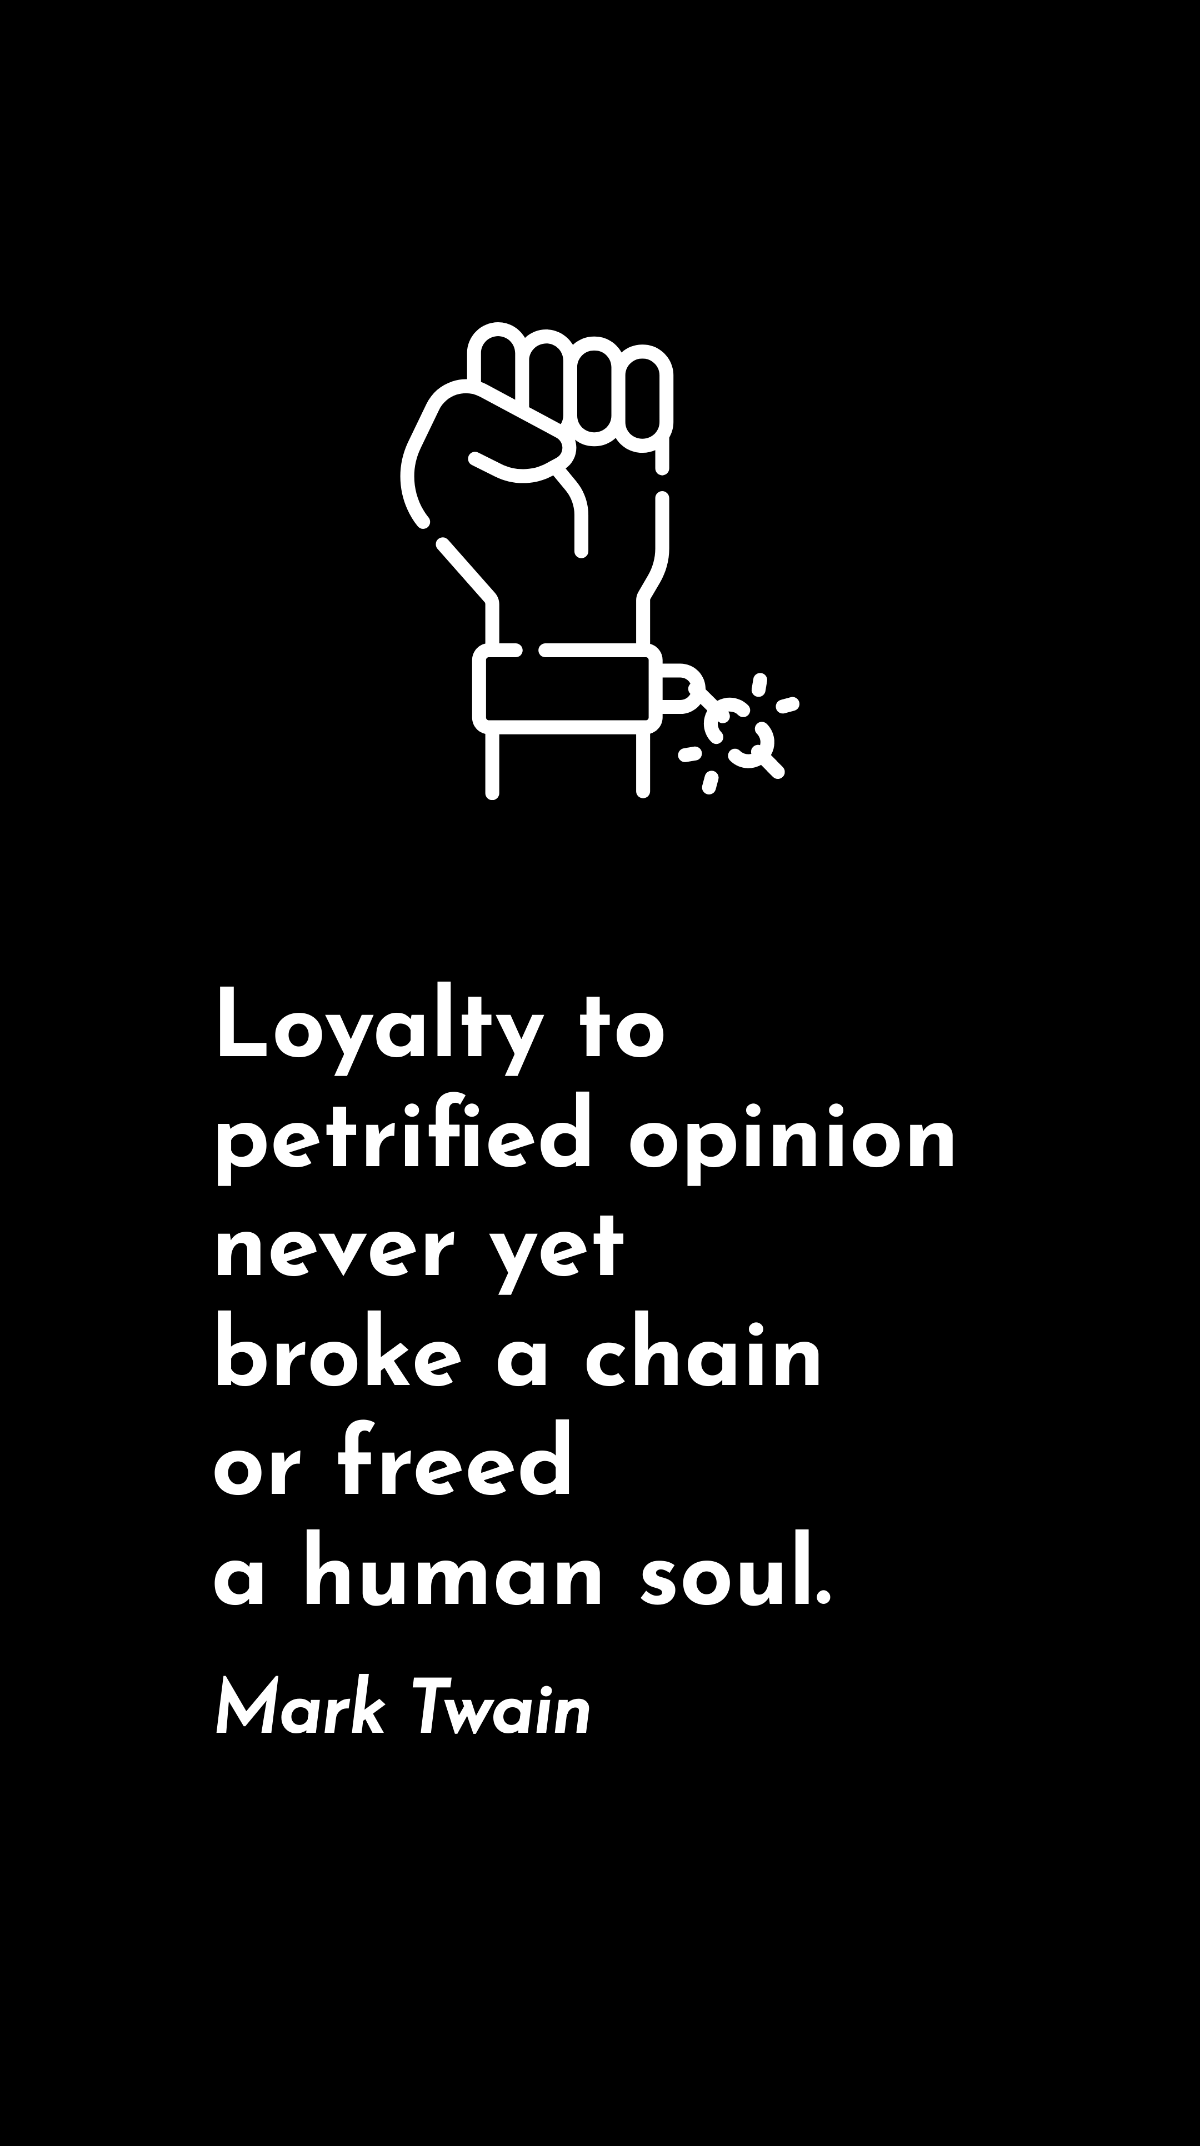 Mark Twain - Loyalty to petrified opinion never yet broke a chain or freed a human soul.